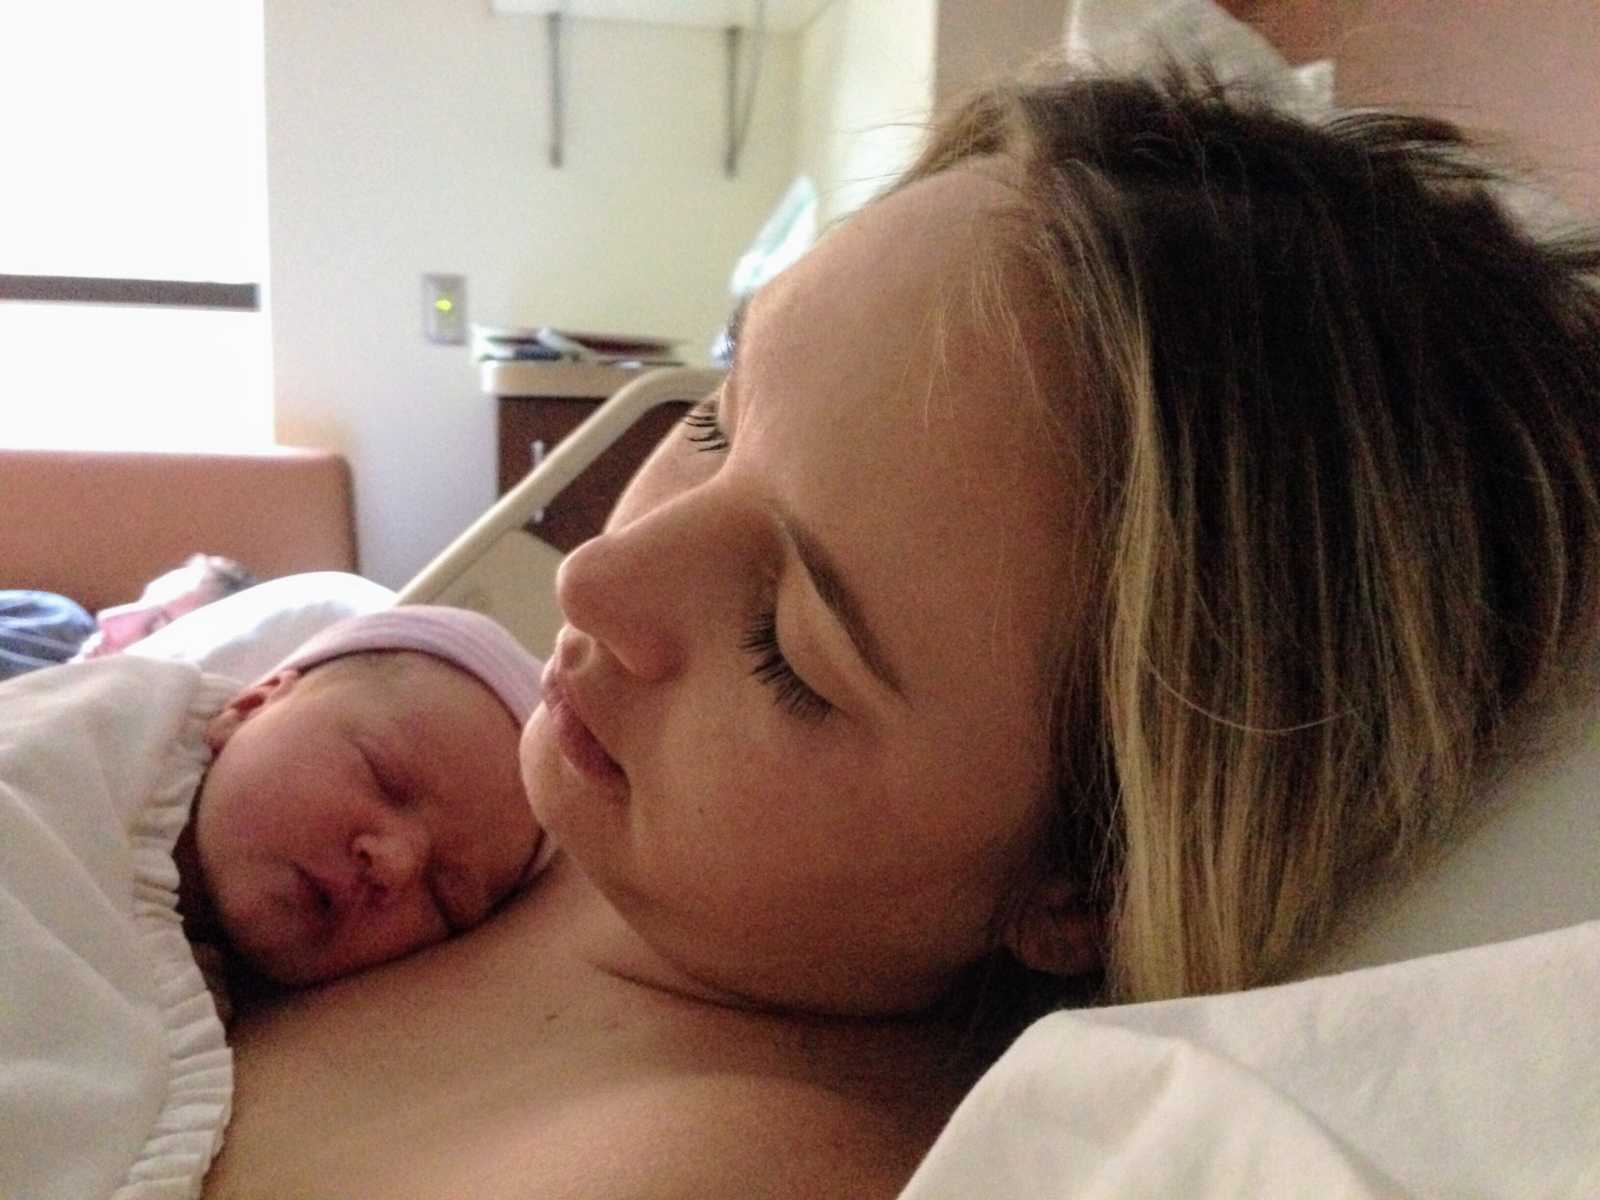 Woman who just gave birth sleeps while holding newborn to chest